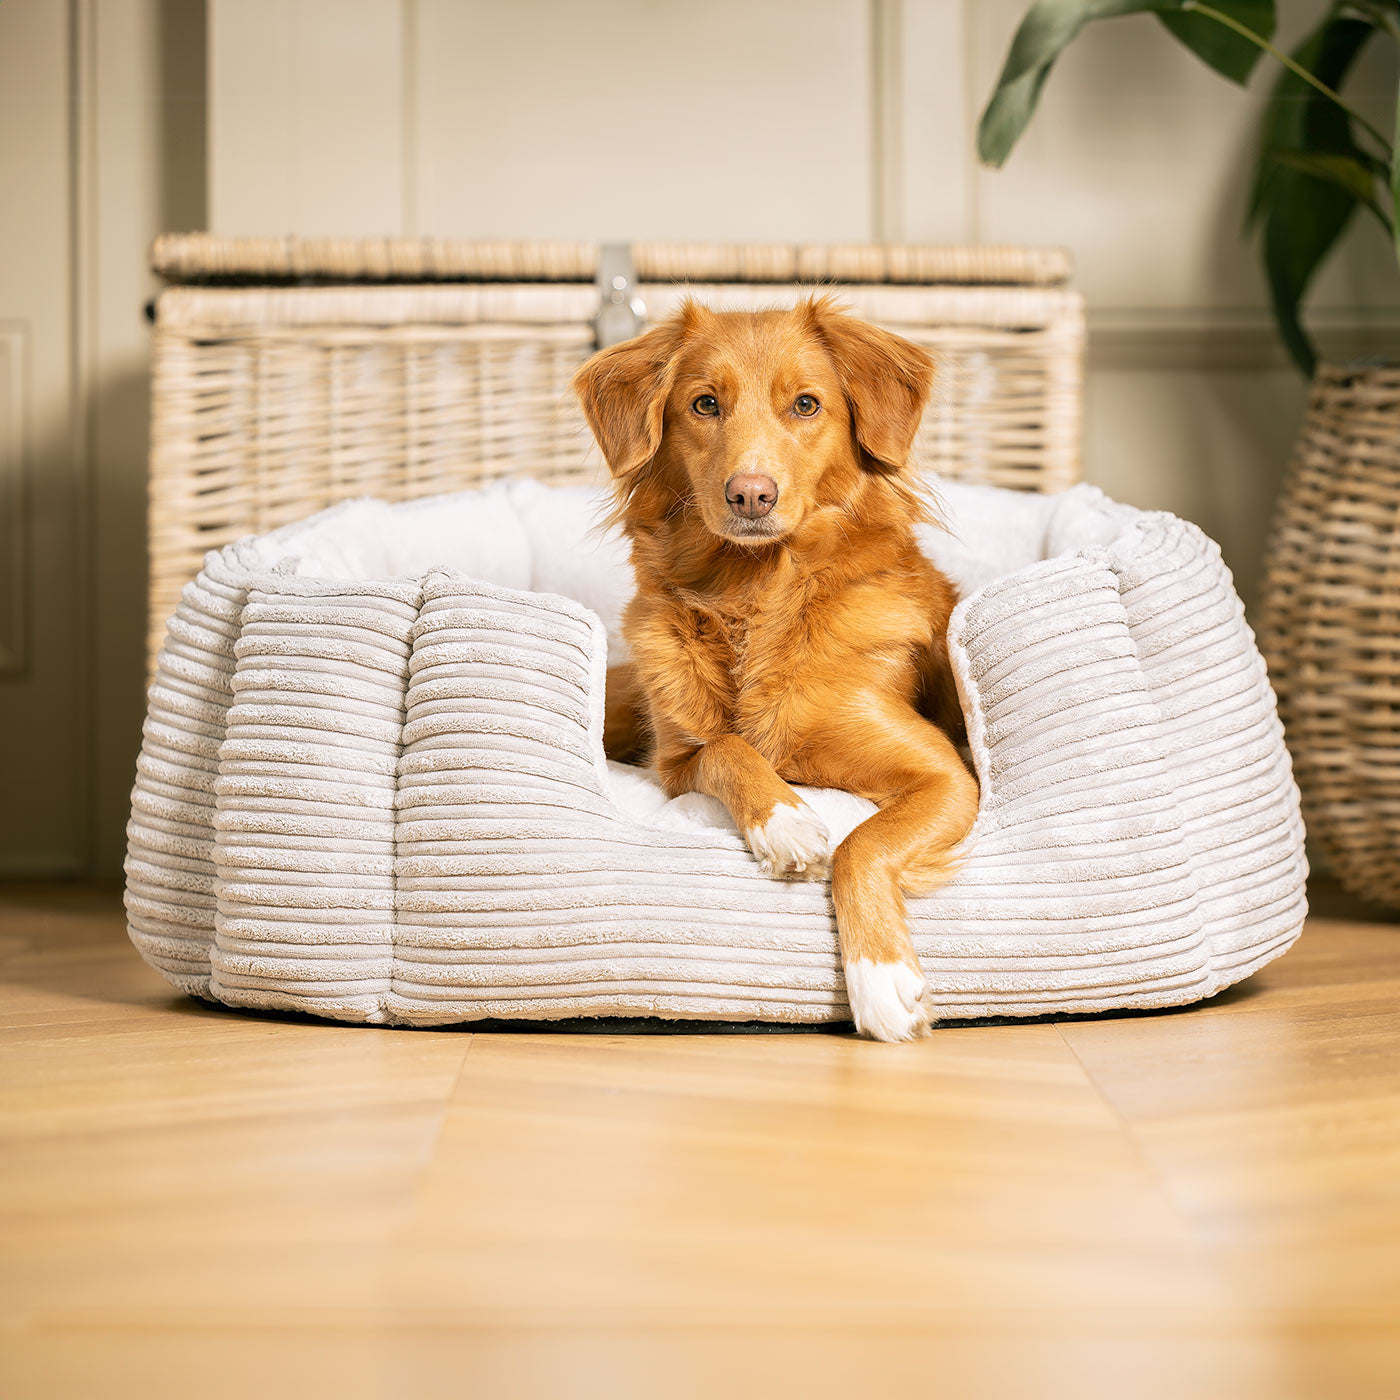 Discover Our Luxurious High Wall Bed For Dogs, Featuring inner pillow with plush teddy fleece on one side To Craft The Perfect Cat Bed In Stunning Essentials Light Grey Plush! Available To Personalise Now at Lords & Labradors    